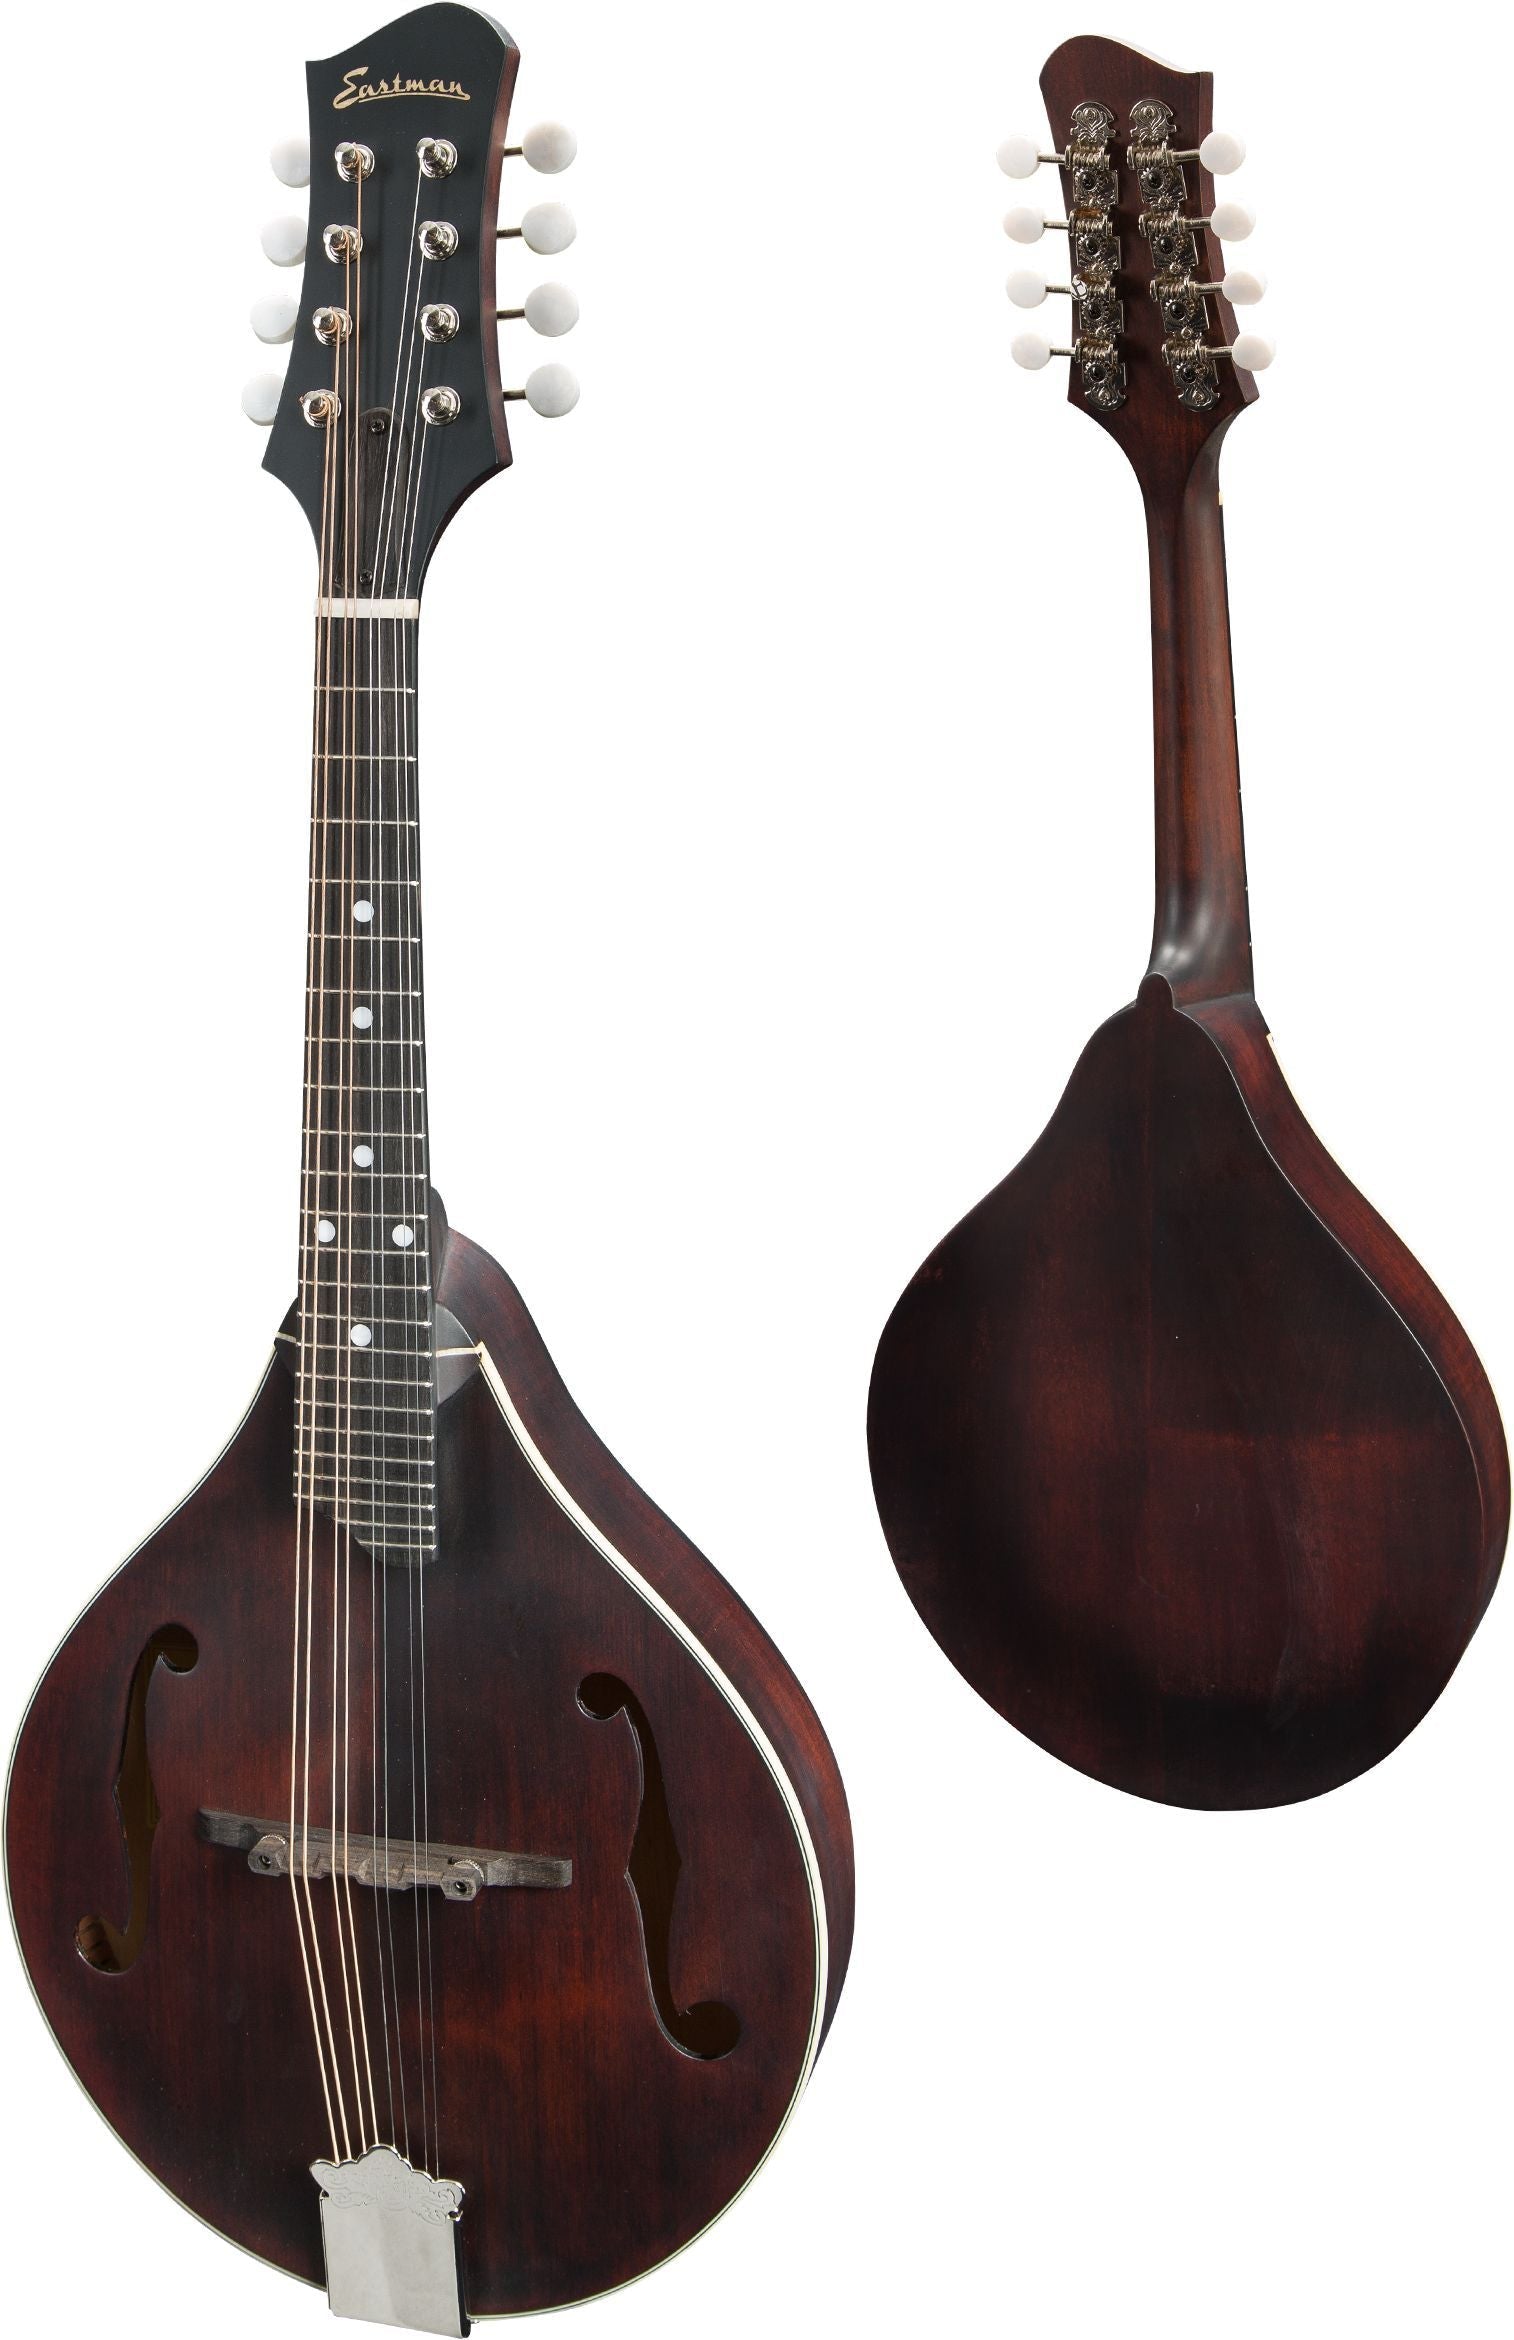 Eastman MD305L A-style Mandolin (F-holes, Solid Spruce top, Solid Maple back and sides, w/Gigbag) - EXCLISIVE Limited UK Price, Mandolin for sale at Richards Guitars.